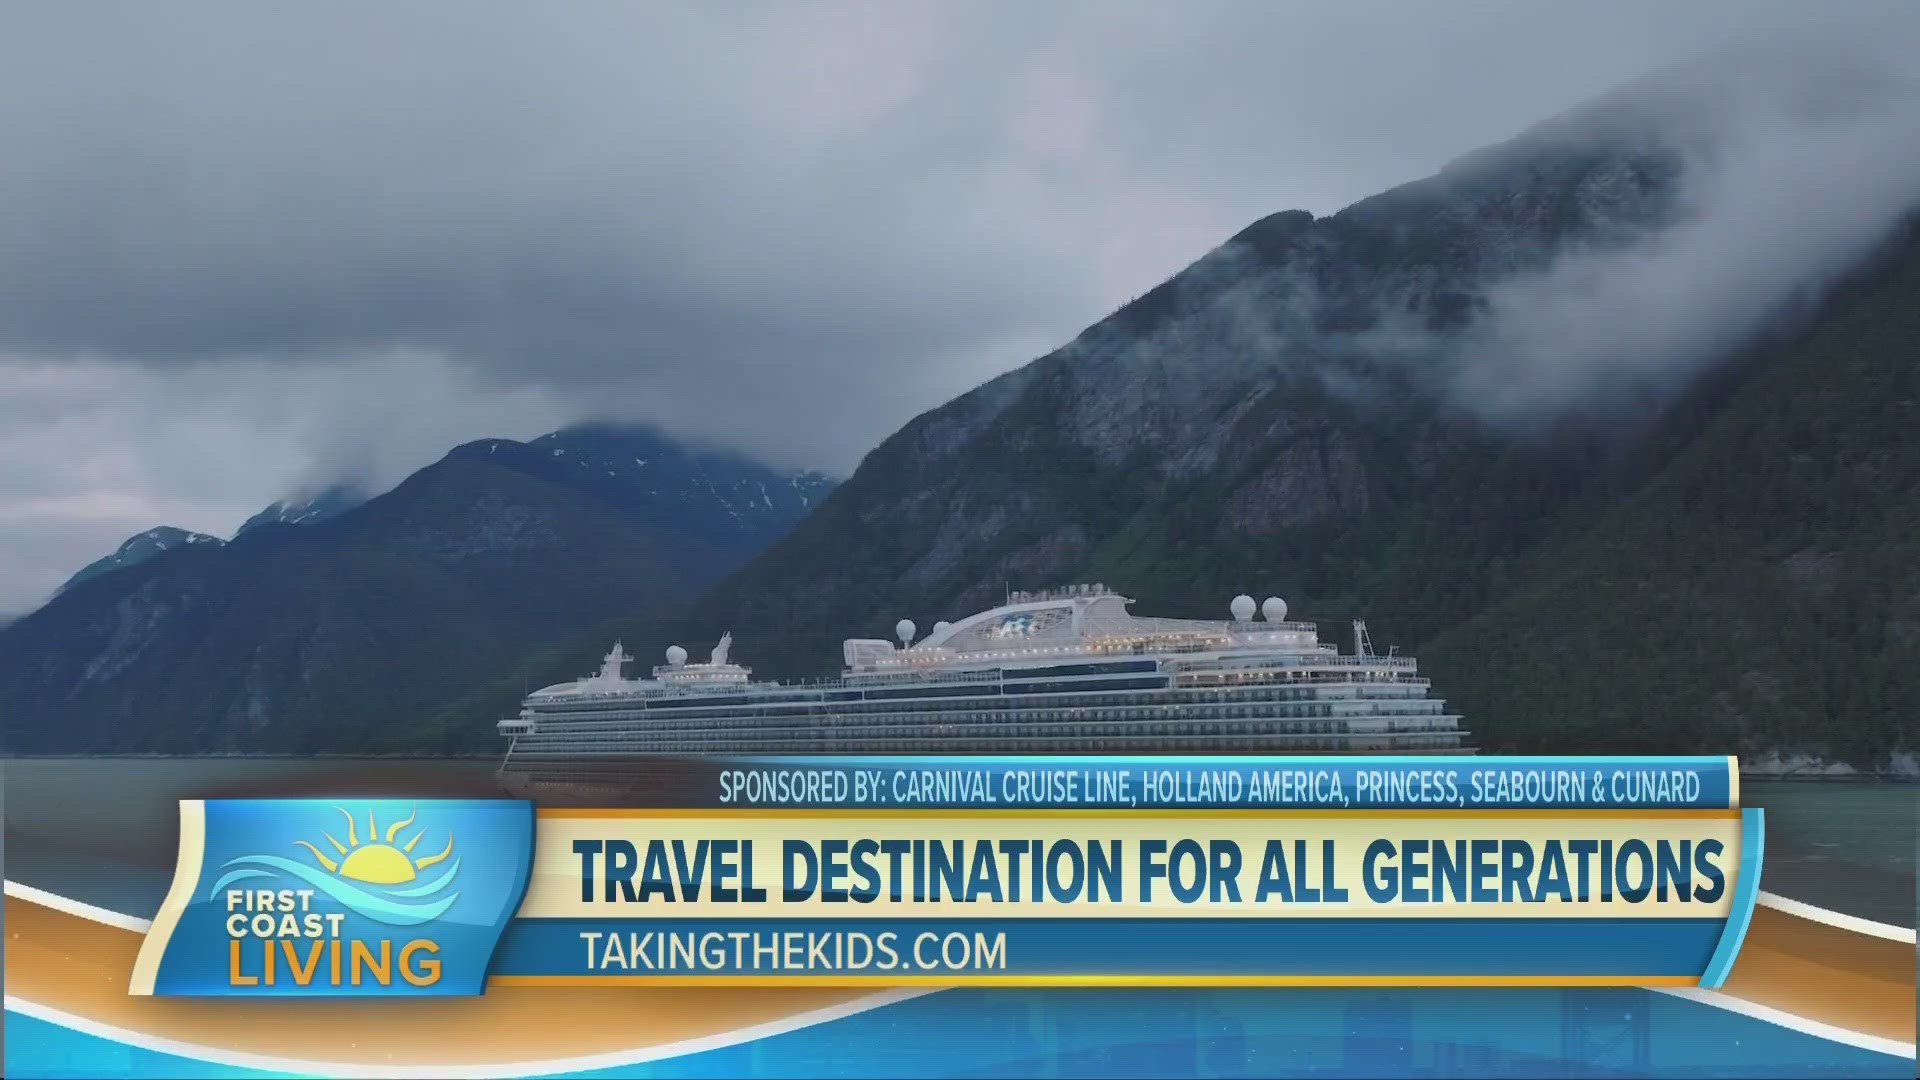 Travel expert Eileen Ogintz shares tips for families who are planning their first multigenerational cruise to Alaska